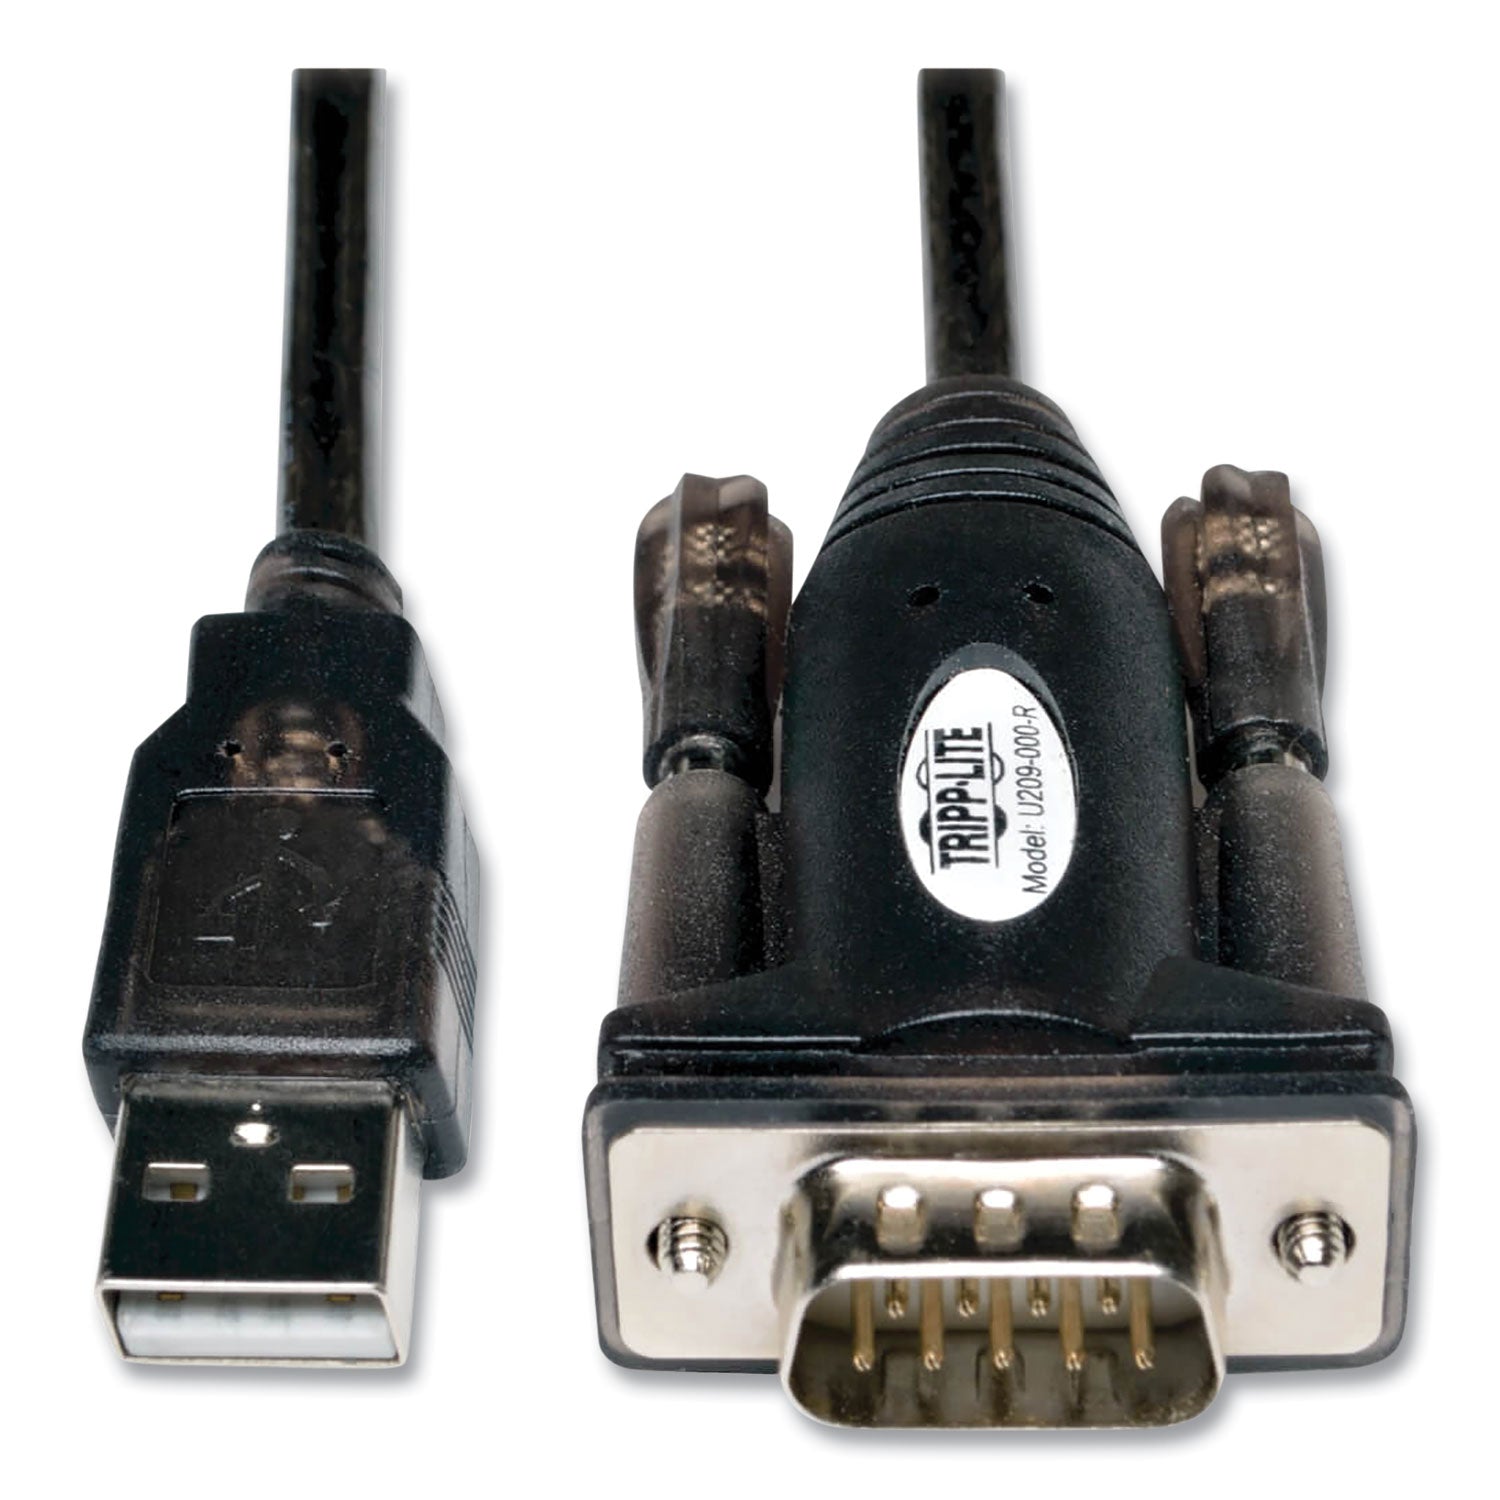 USB-A to Serial Adapter Cable, 5 ft, Black - 